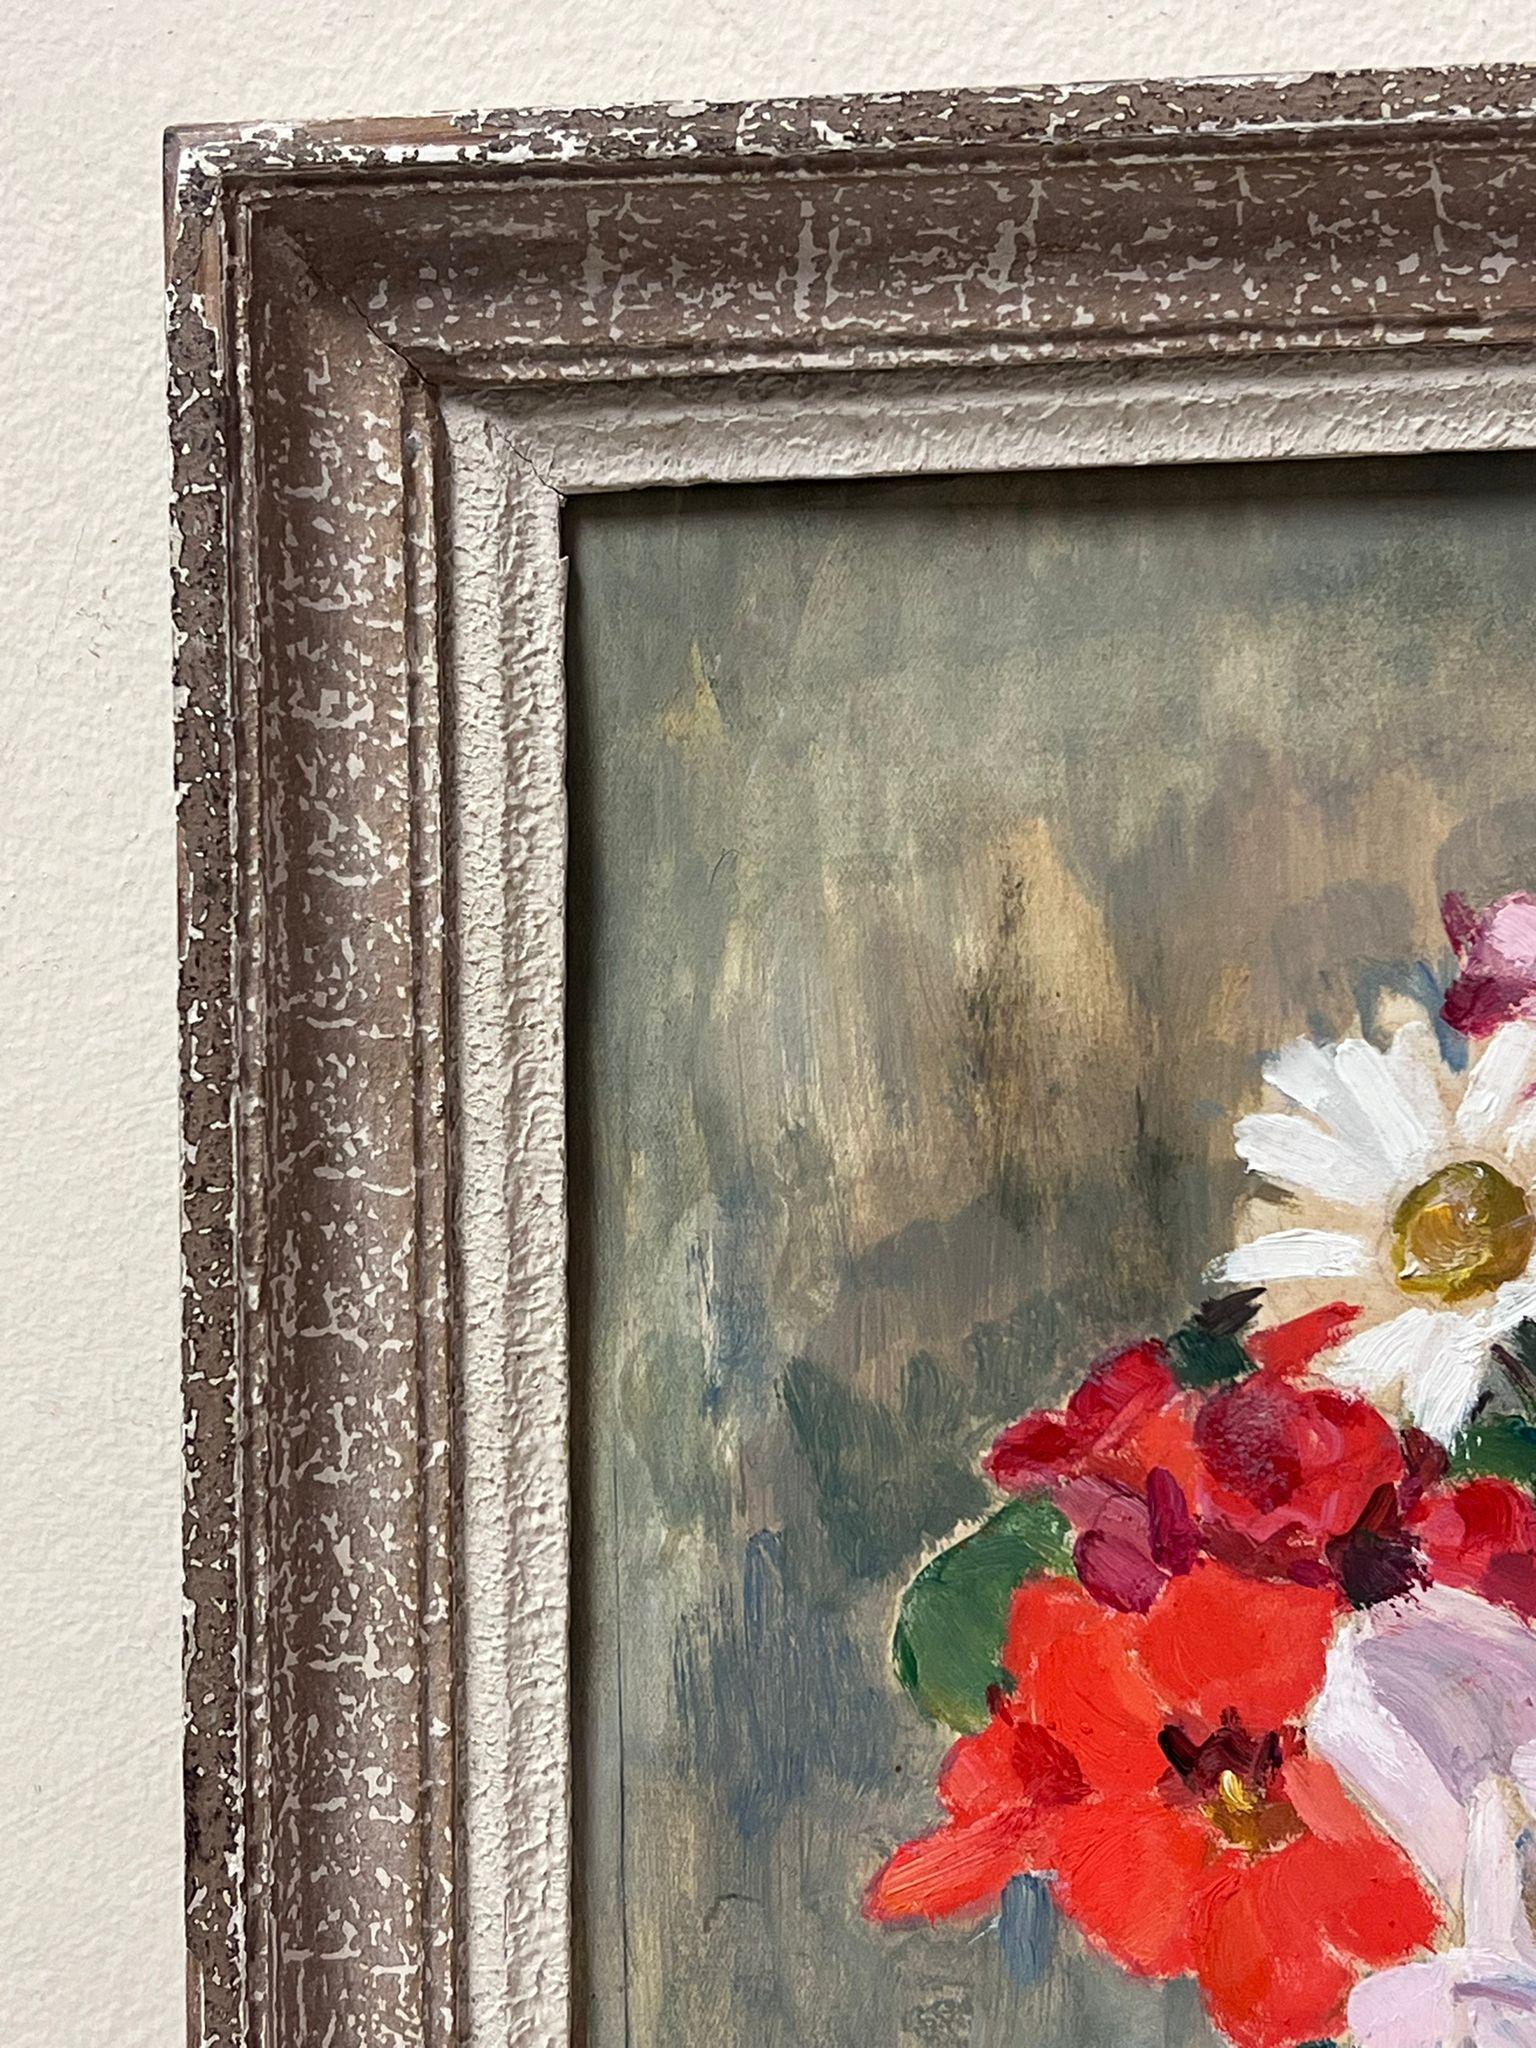 Vintage French Oil Painting 
signed by Louise Alix (French, 1888-1980) *see notes below
provenance stamp to the back/ titled verso
oil painting on board, framed
framed: 17 high by 13.5 inches wide
painting: 15 x 12 inches
condition: overall very